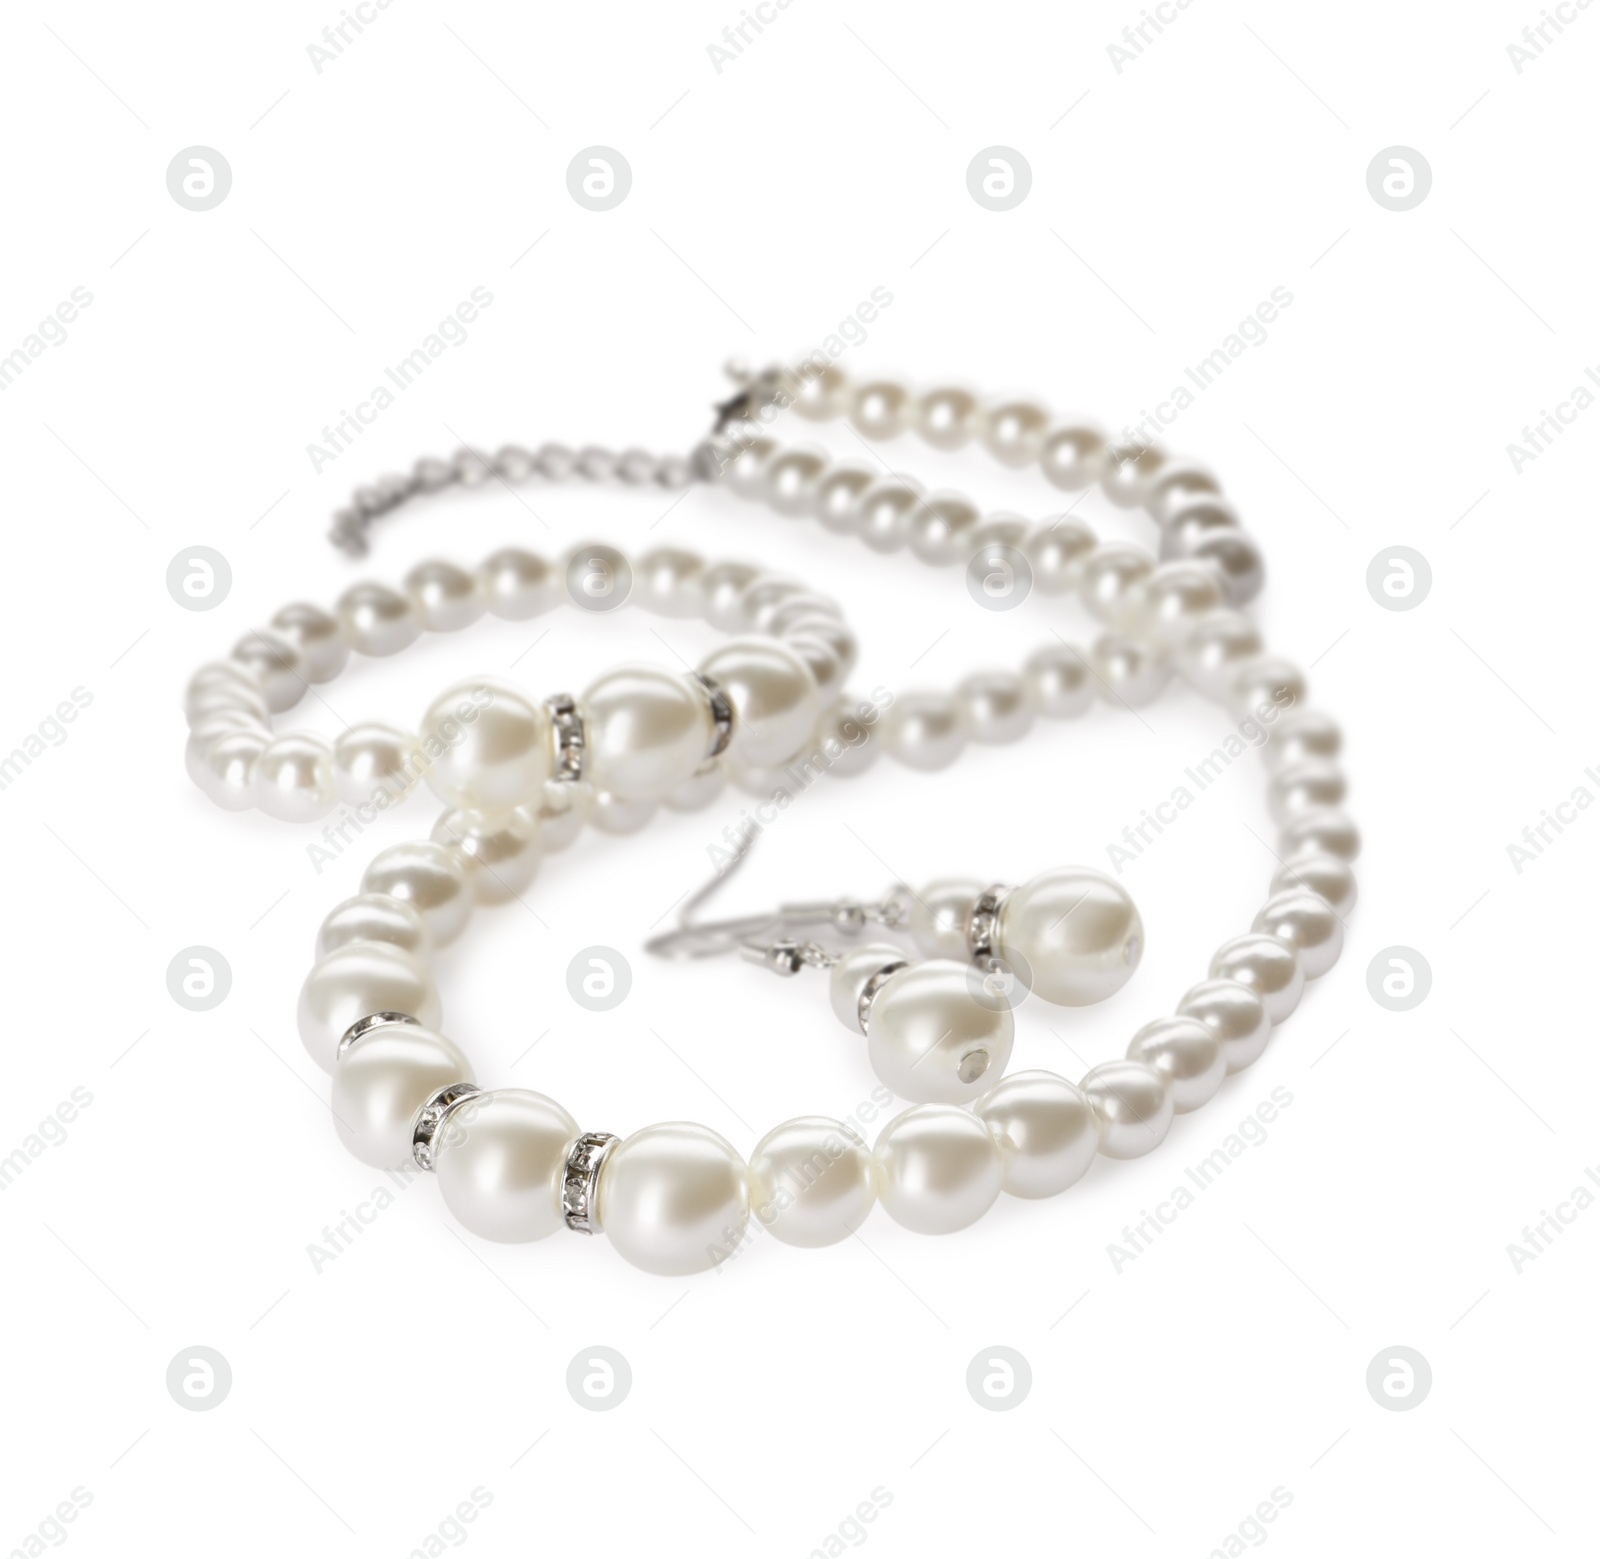 Photo of Elegant pearl necklace, bracelet and earrings on white background